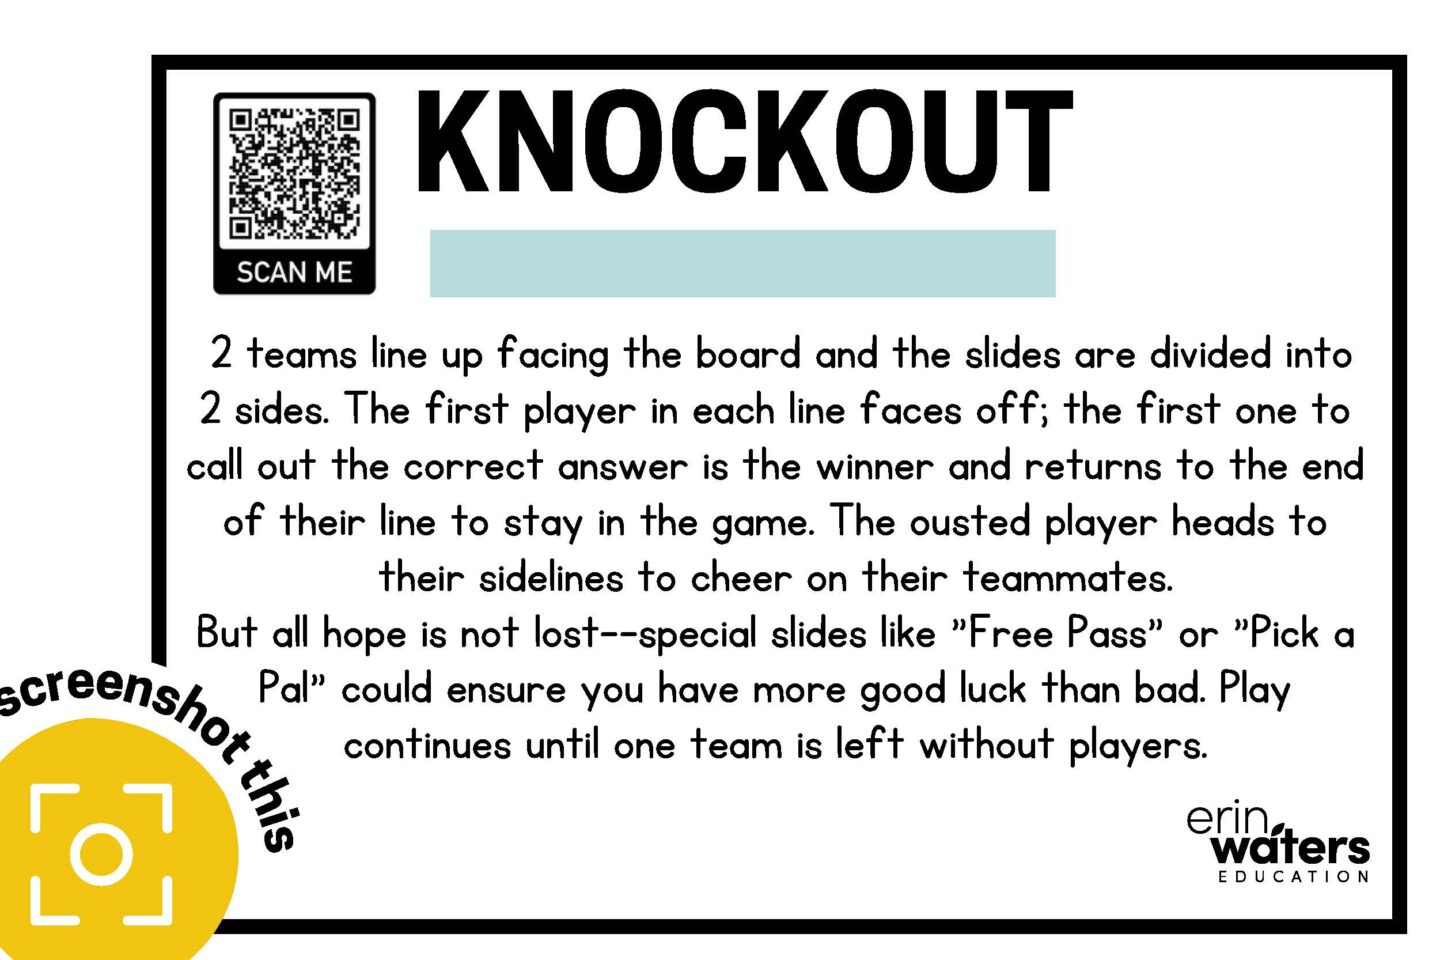 classroom math games for 6th graders example #3 - Knockout. A slide showing the rules and a prompt to "screenshot this" in the left lower corner.